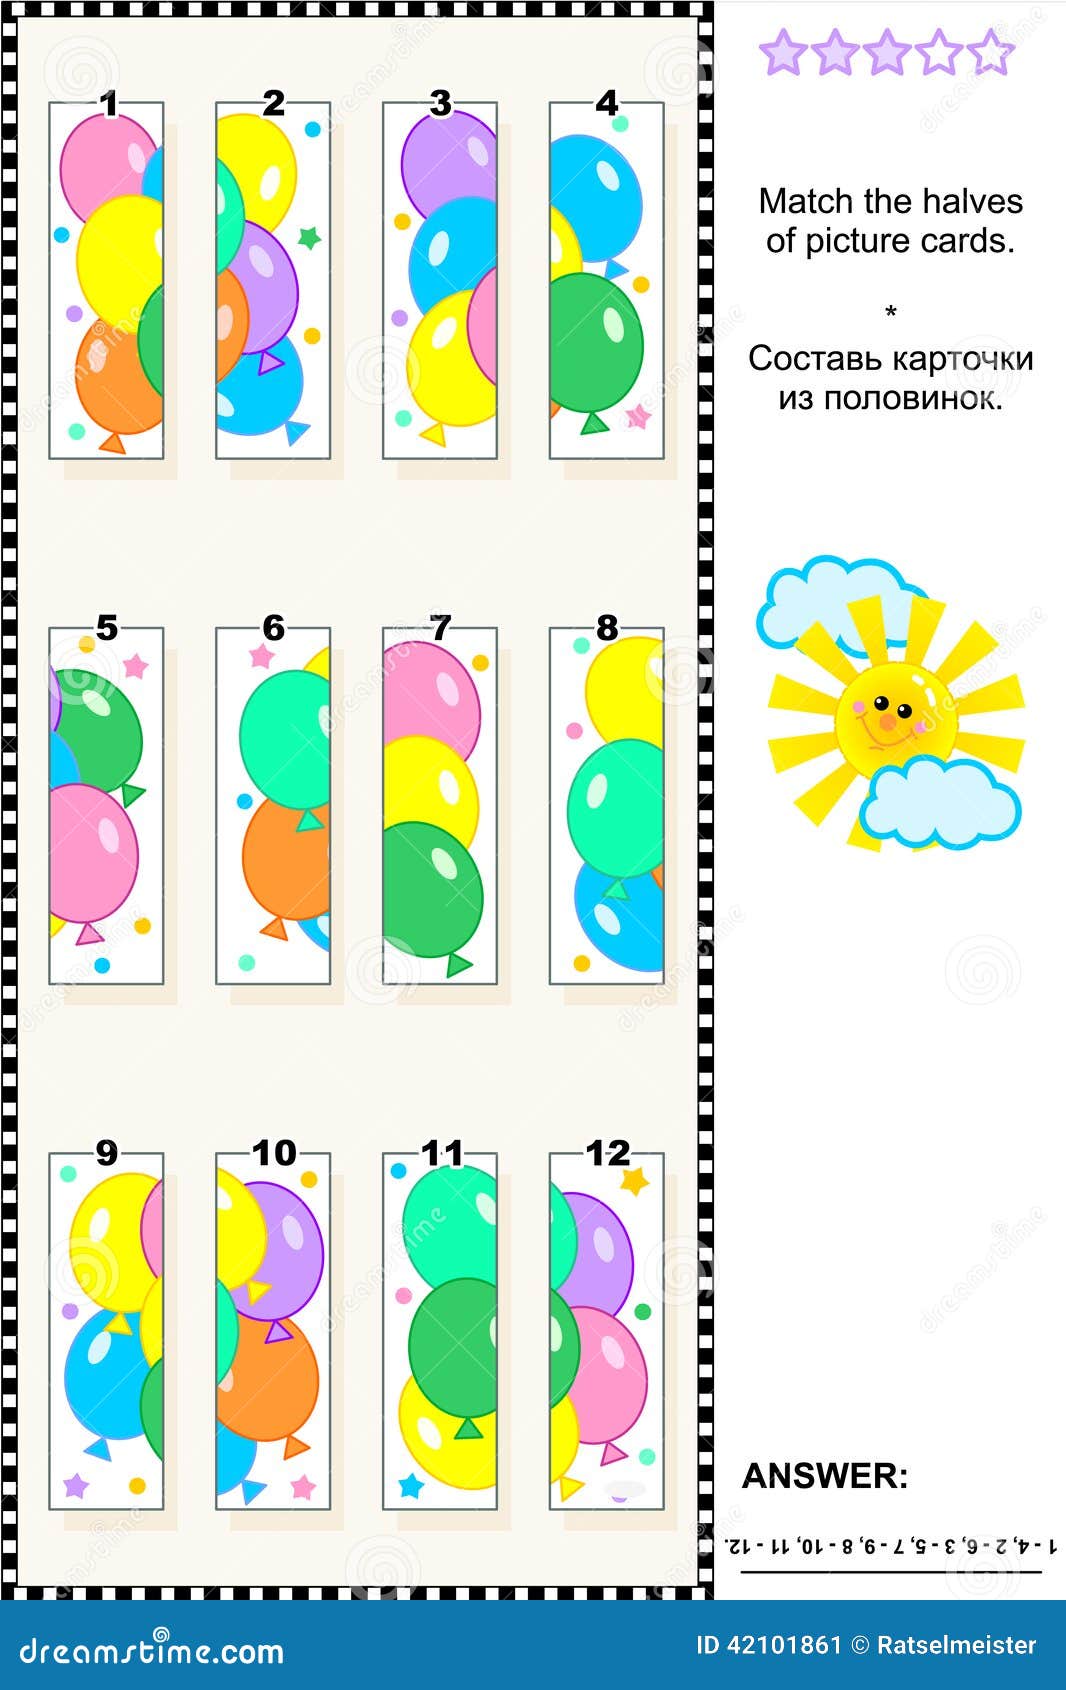 visual puzzle - match the halves - colorful balloons